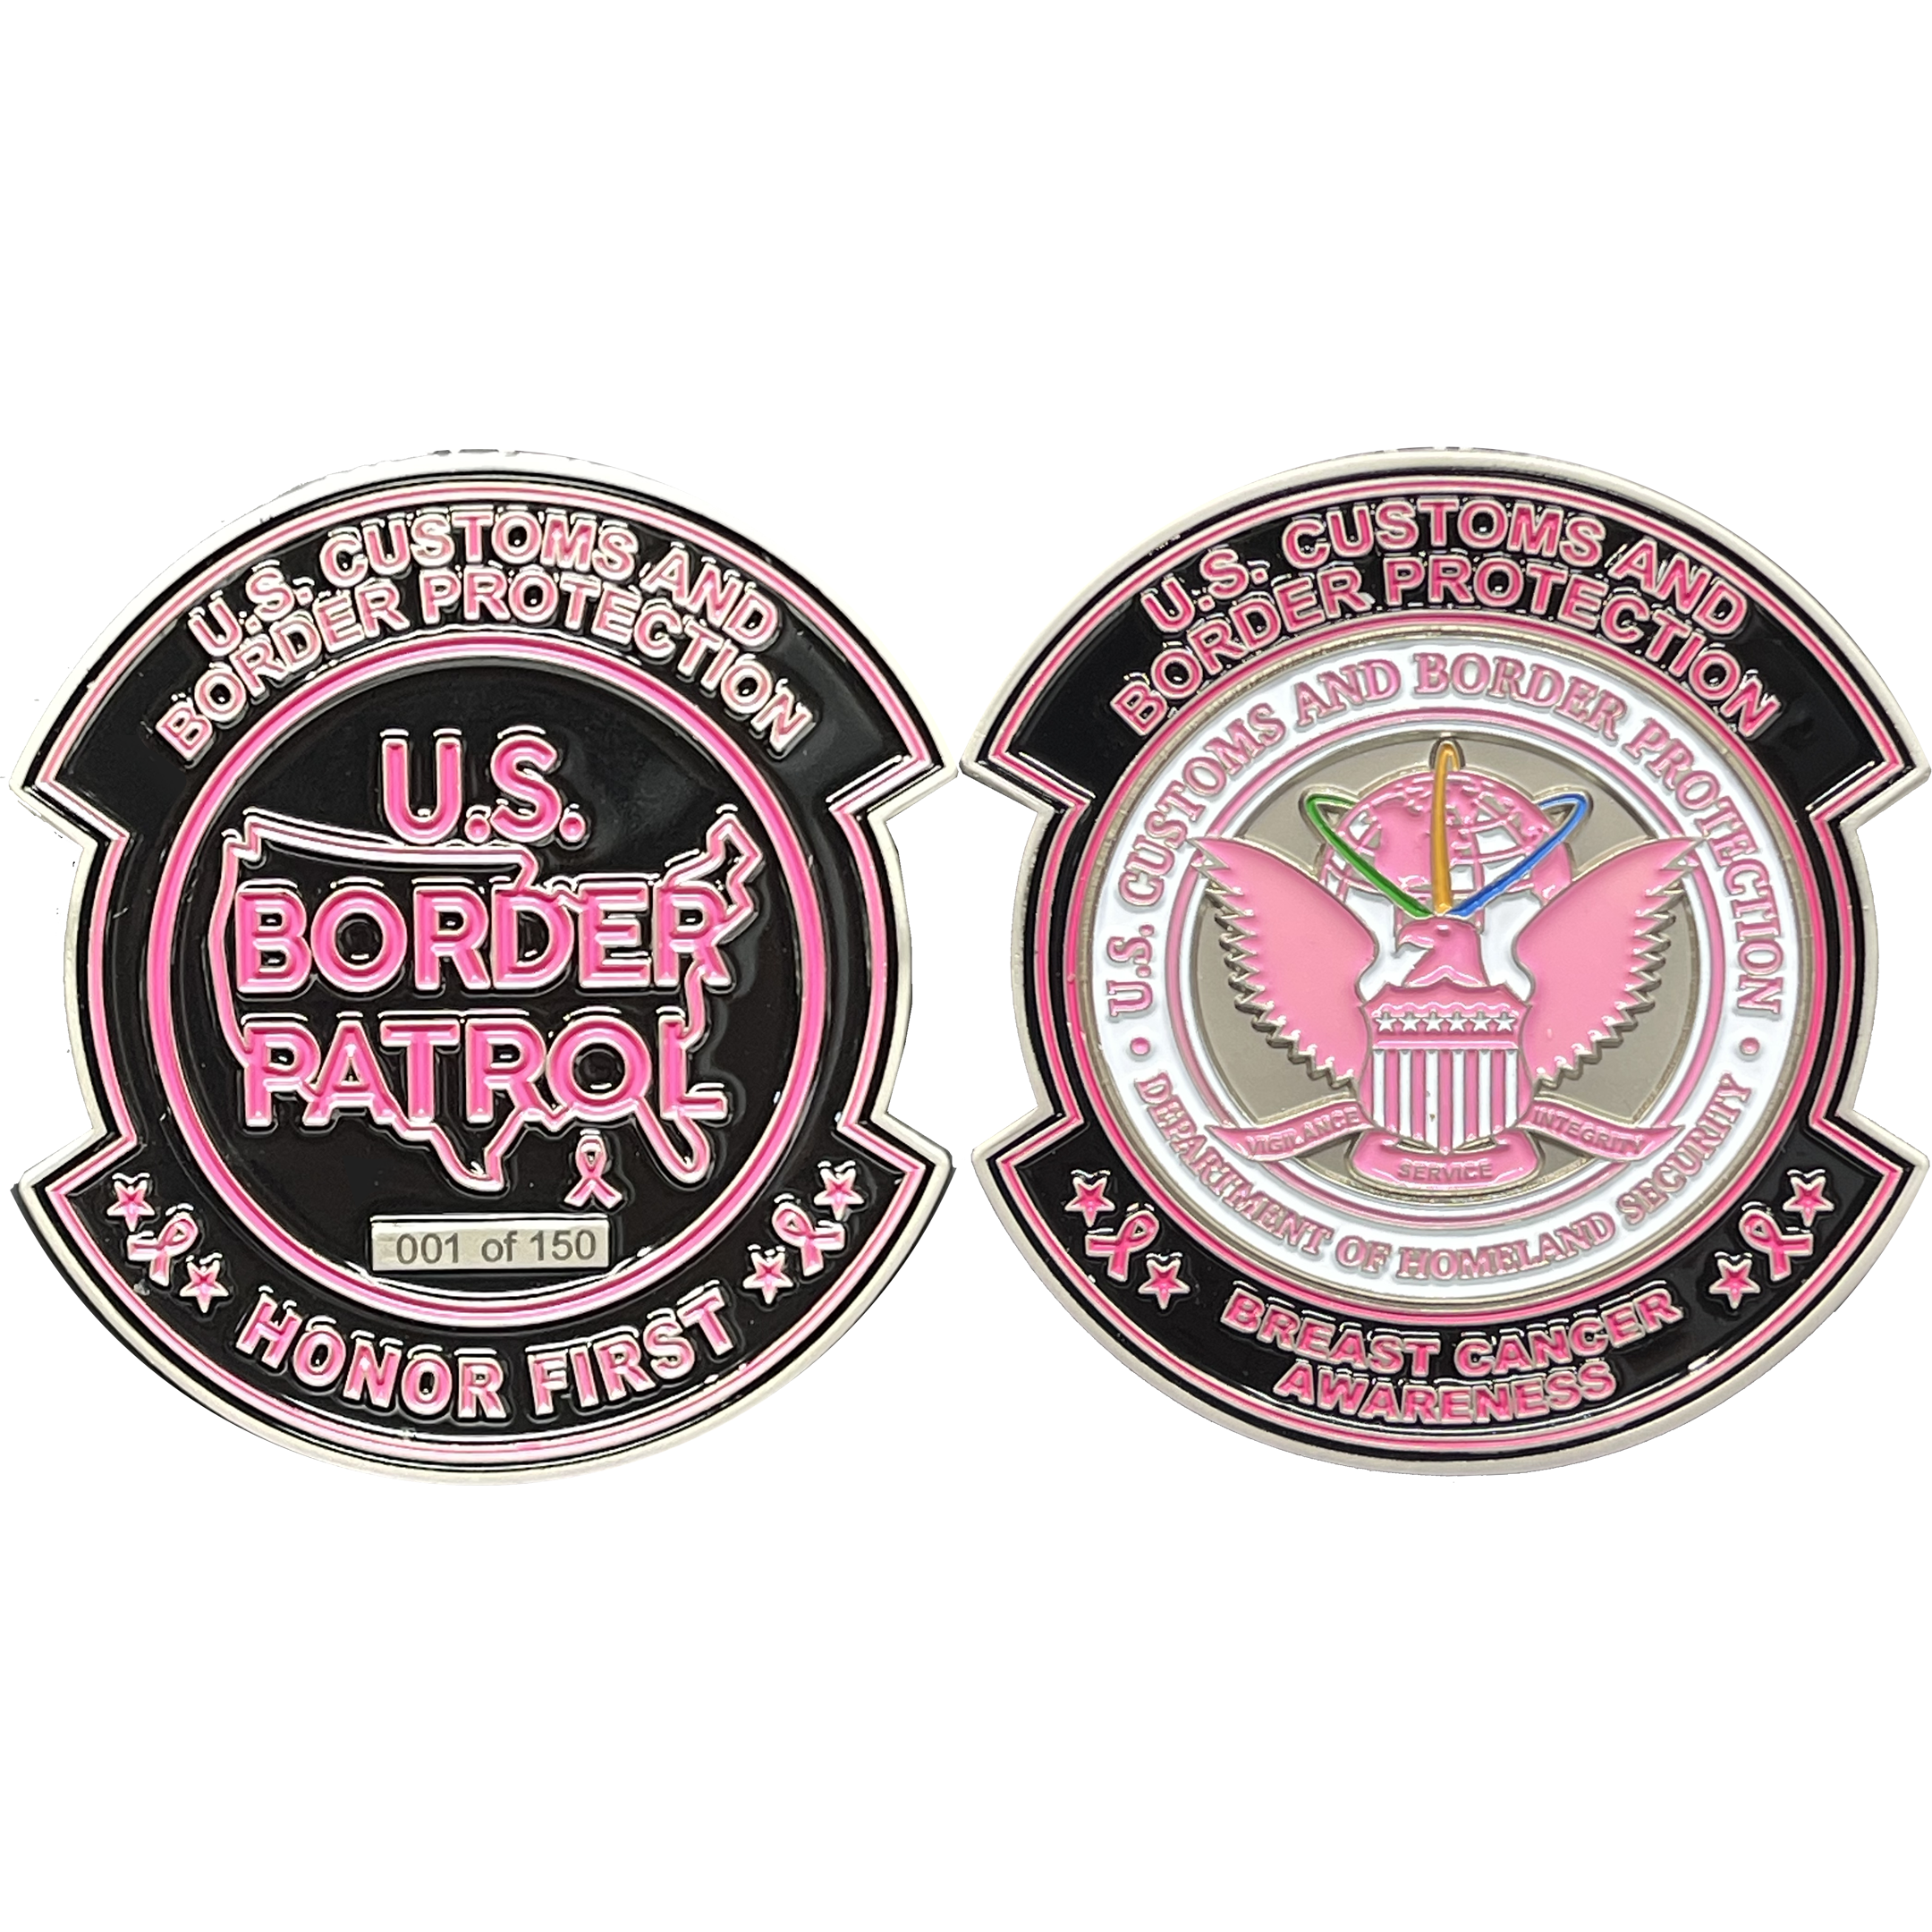 discontinued BL14-010 CBP Pink Border Patrol Agent Challenge Coin Breast Cancer Cancer Awareness